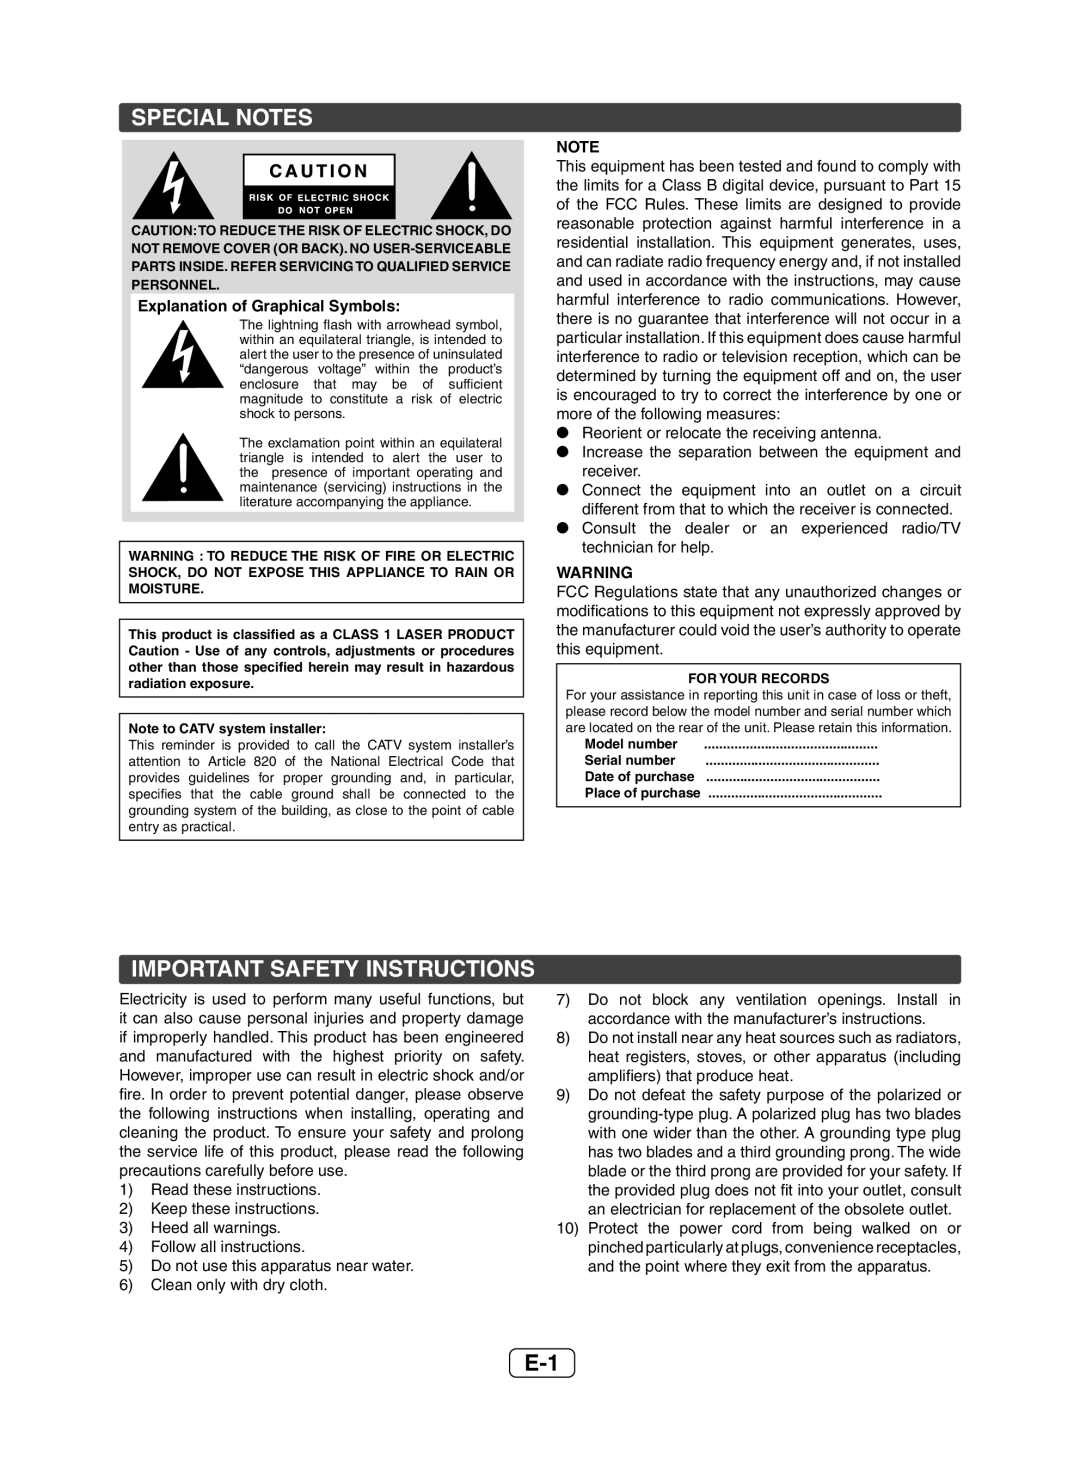 Sharp XL-DH229 operation manual Special Notes, Important Safety Instructions 